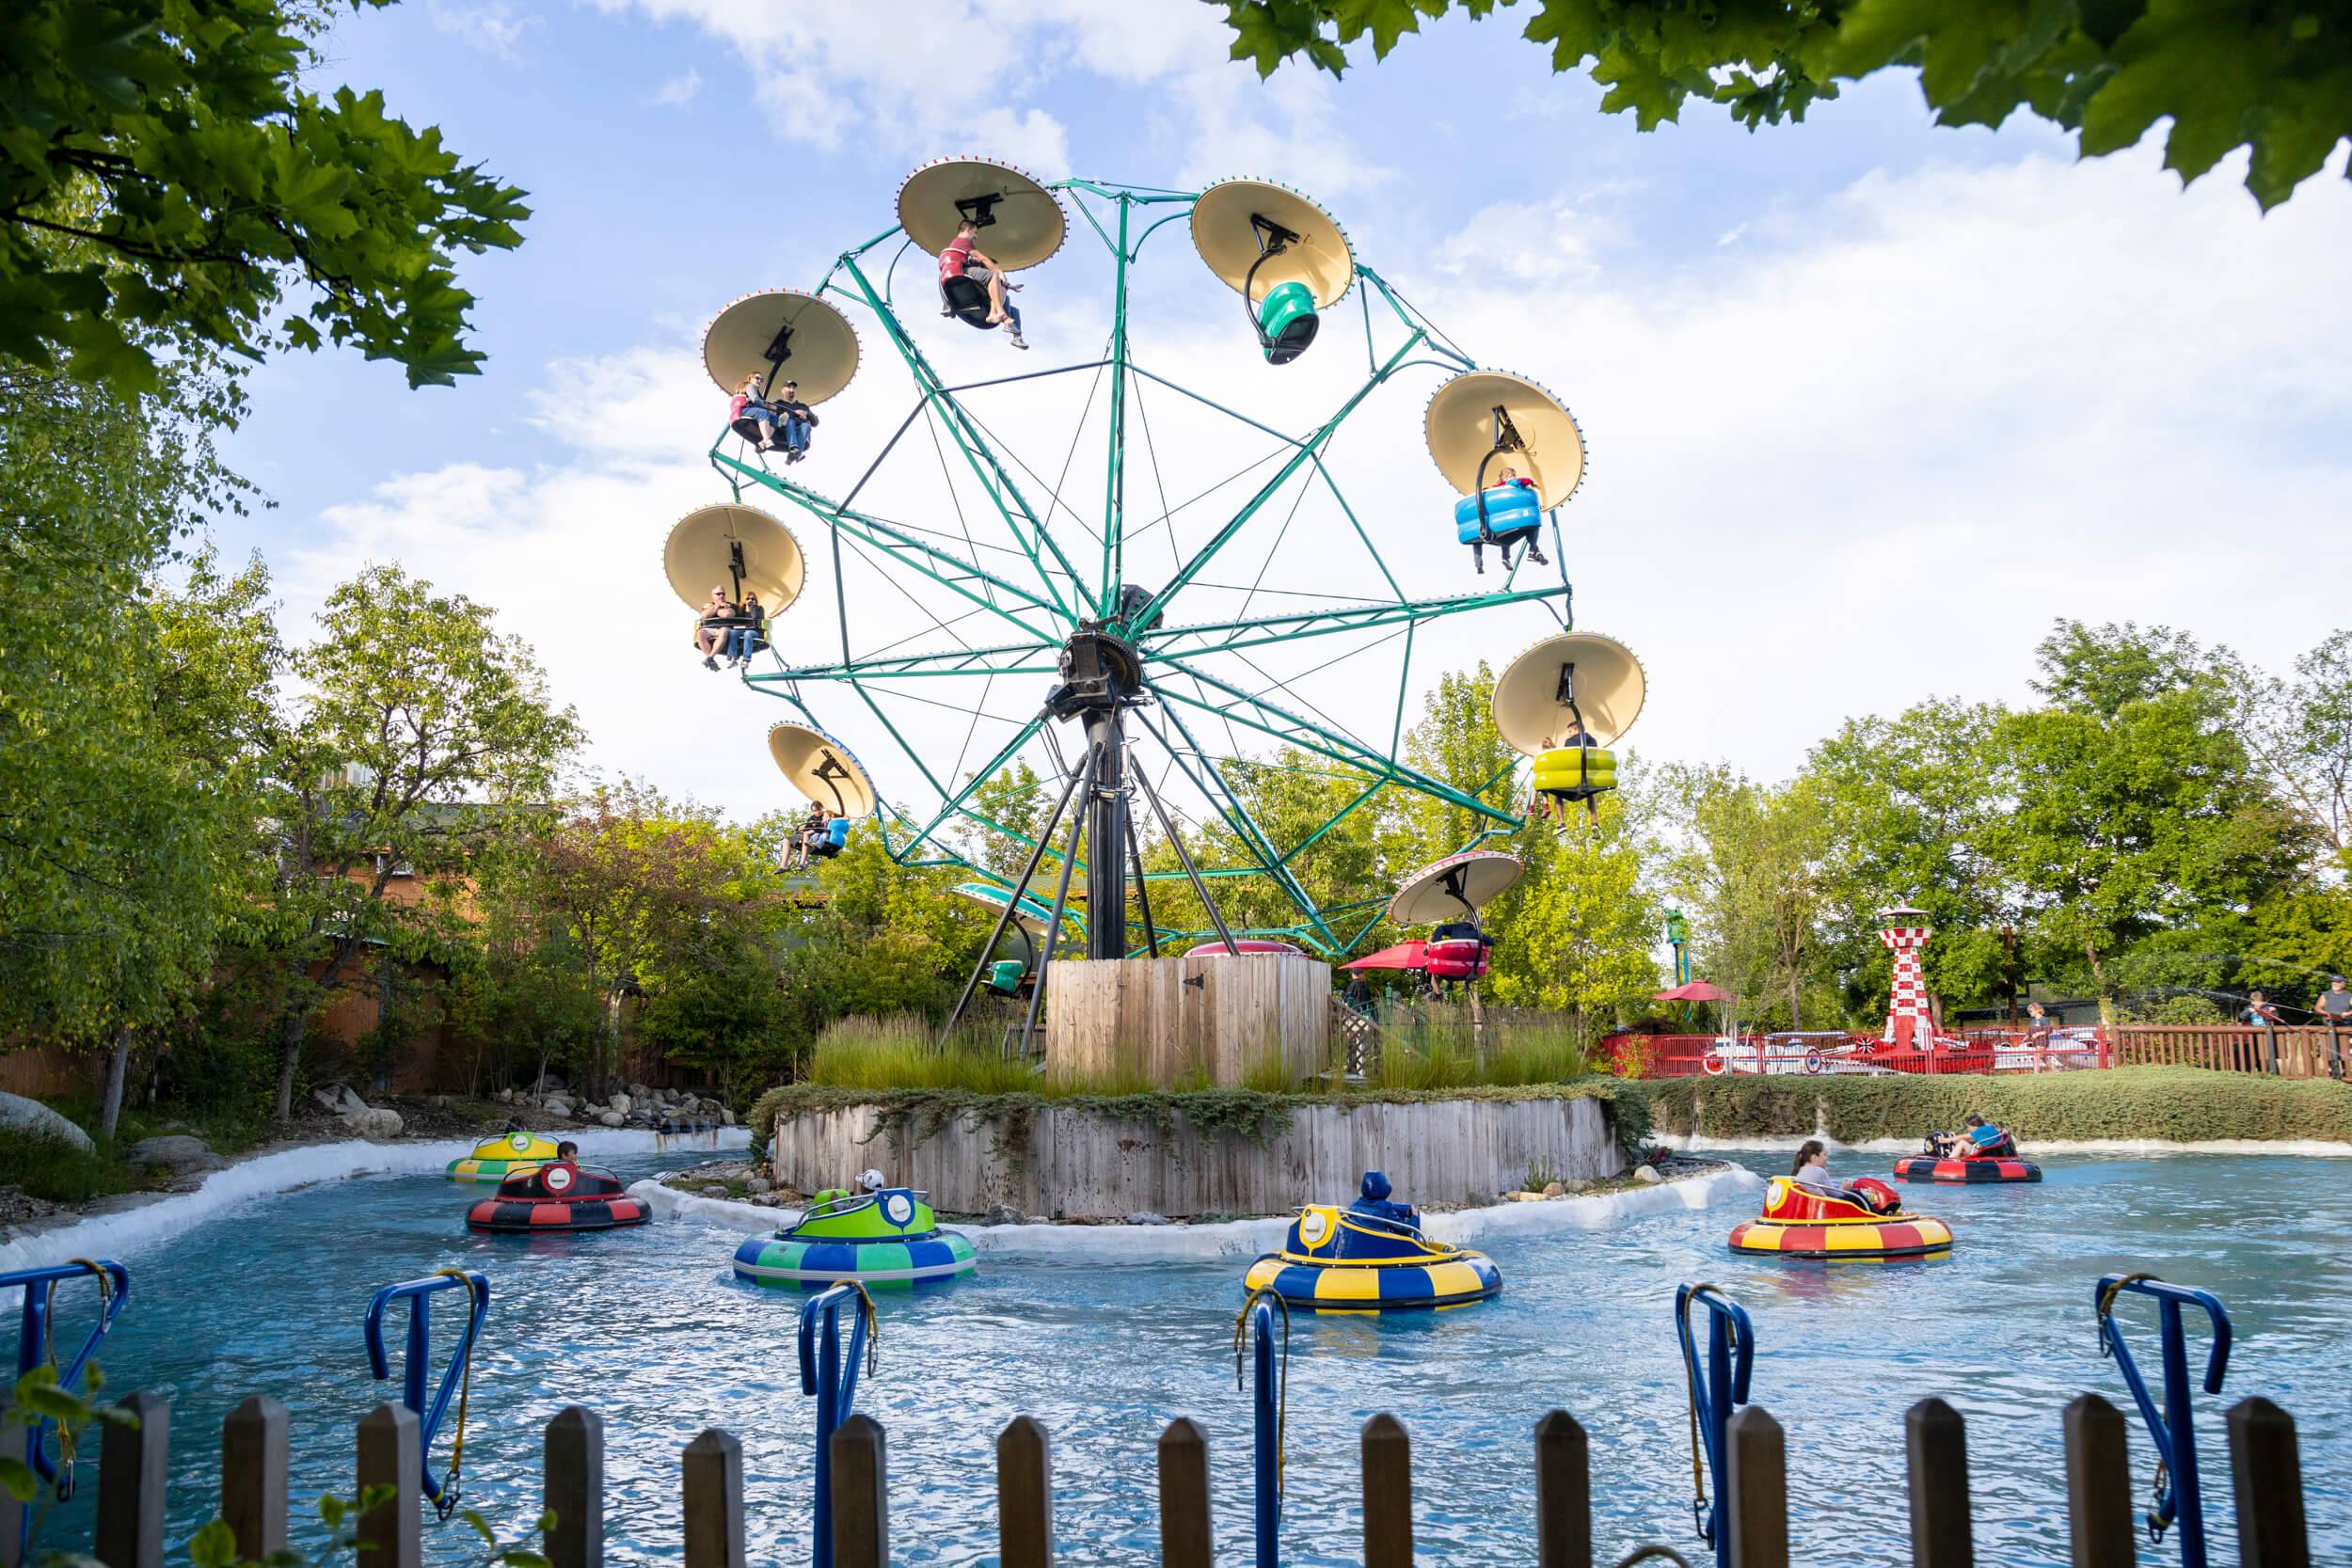 People in bumper boats float around a ferris wheel at Silverwood Theme Park.